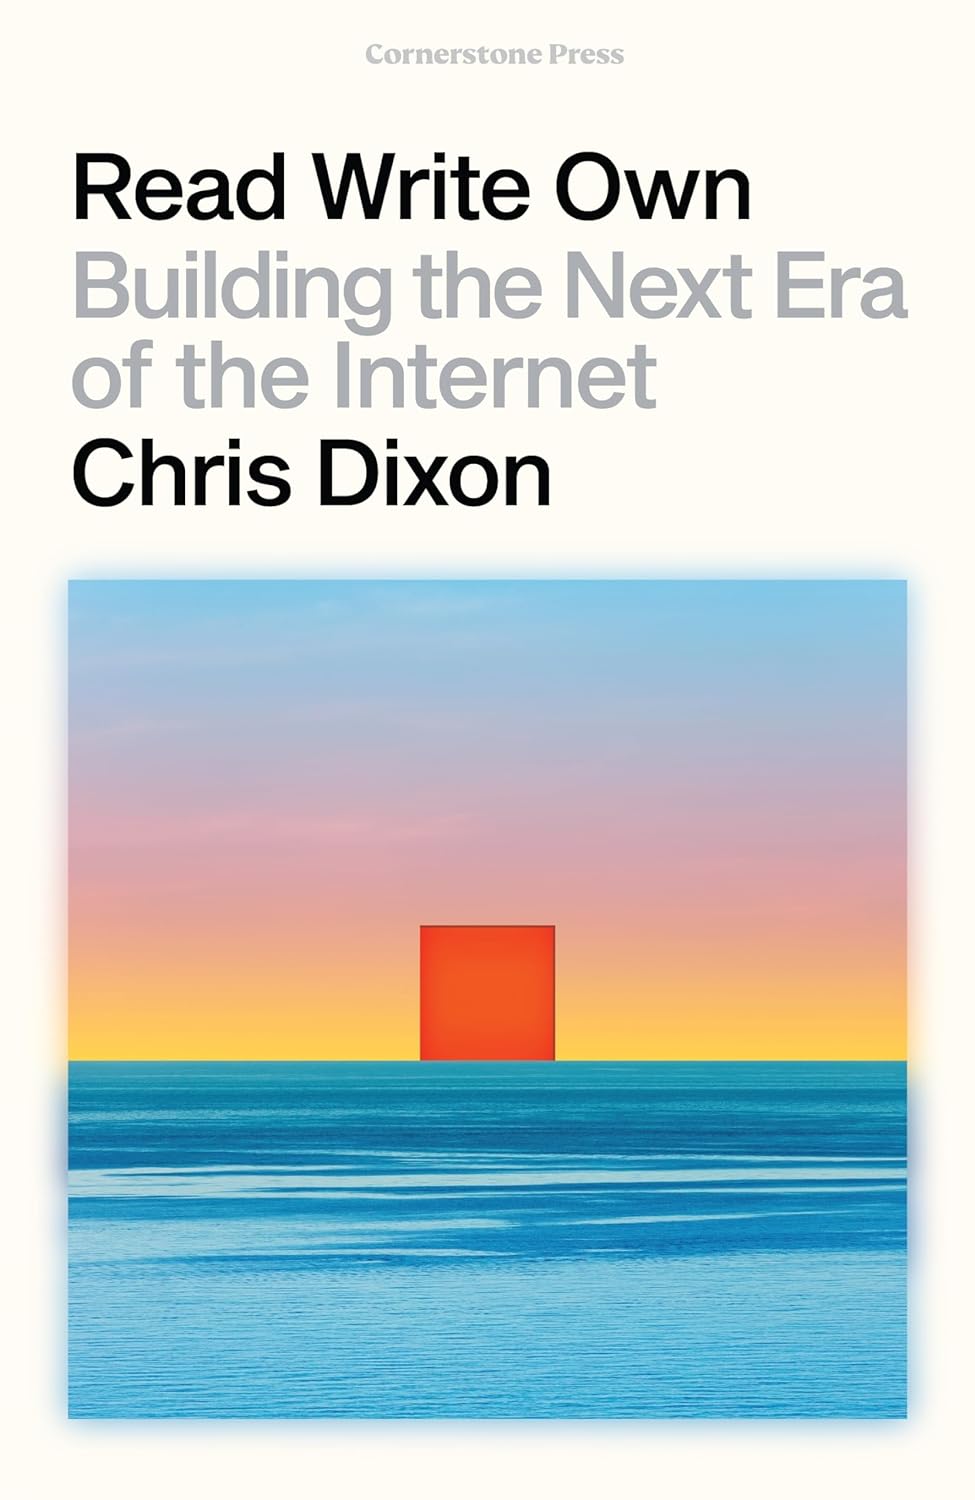 Read Write Own: Building the Next Era of the Internet by Chris Dixon, Robert Petkoff